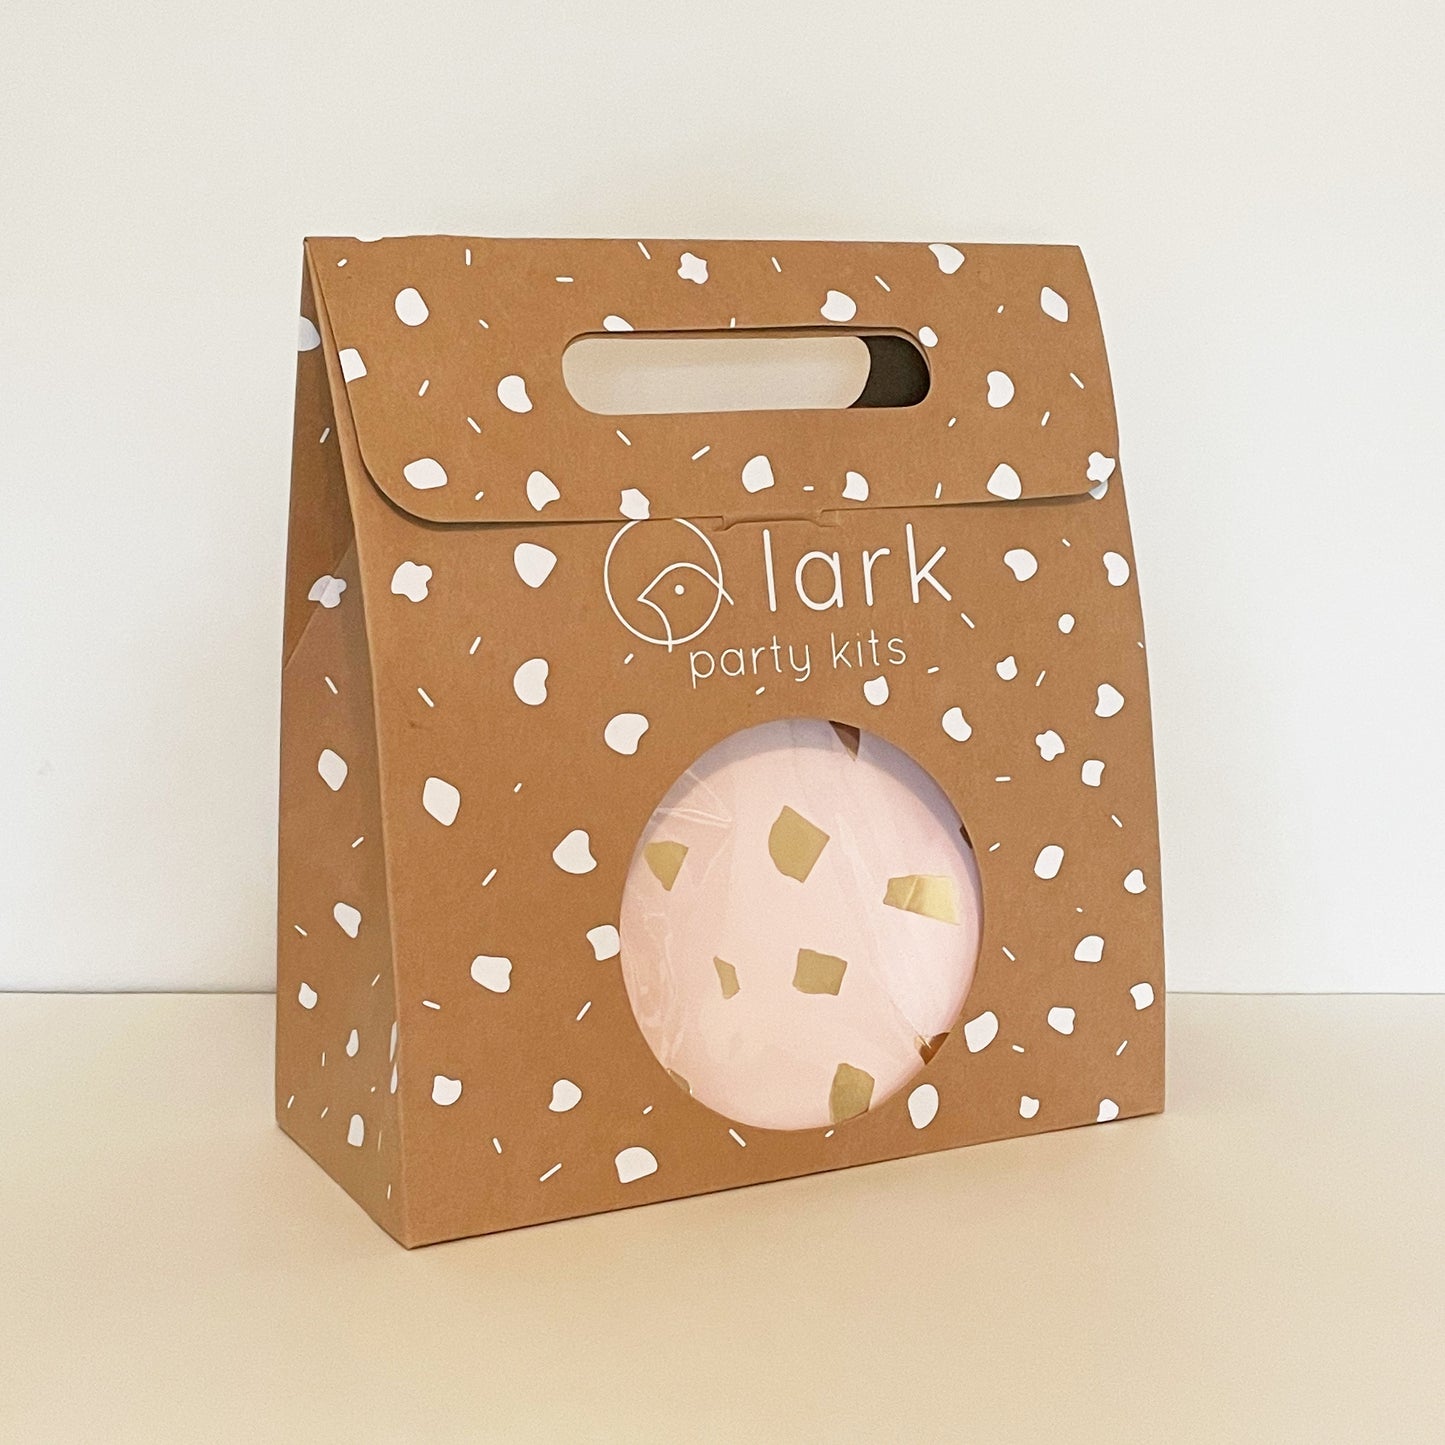 The Blush Party Kit in its kraft brown and white carry box. The box features a handle and a circular opening where you can see the contents inside.